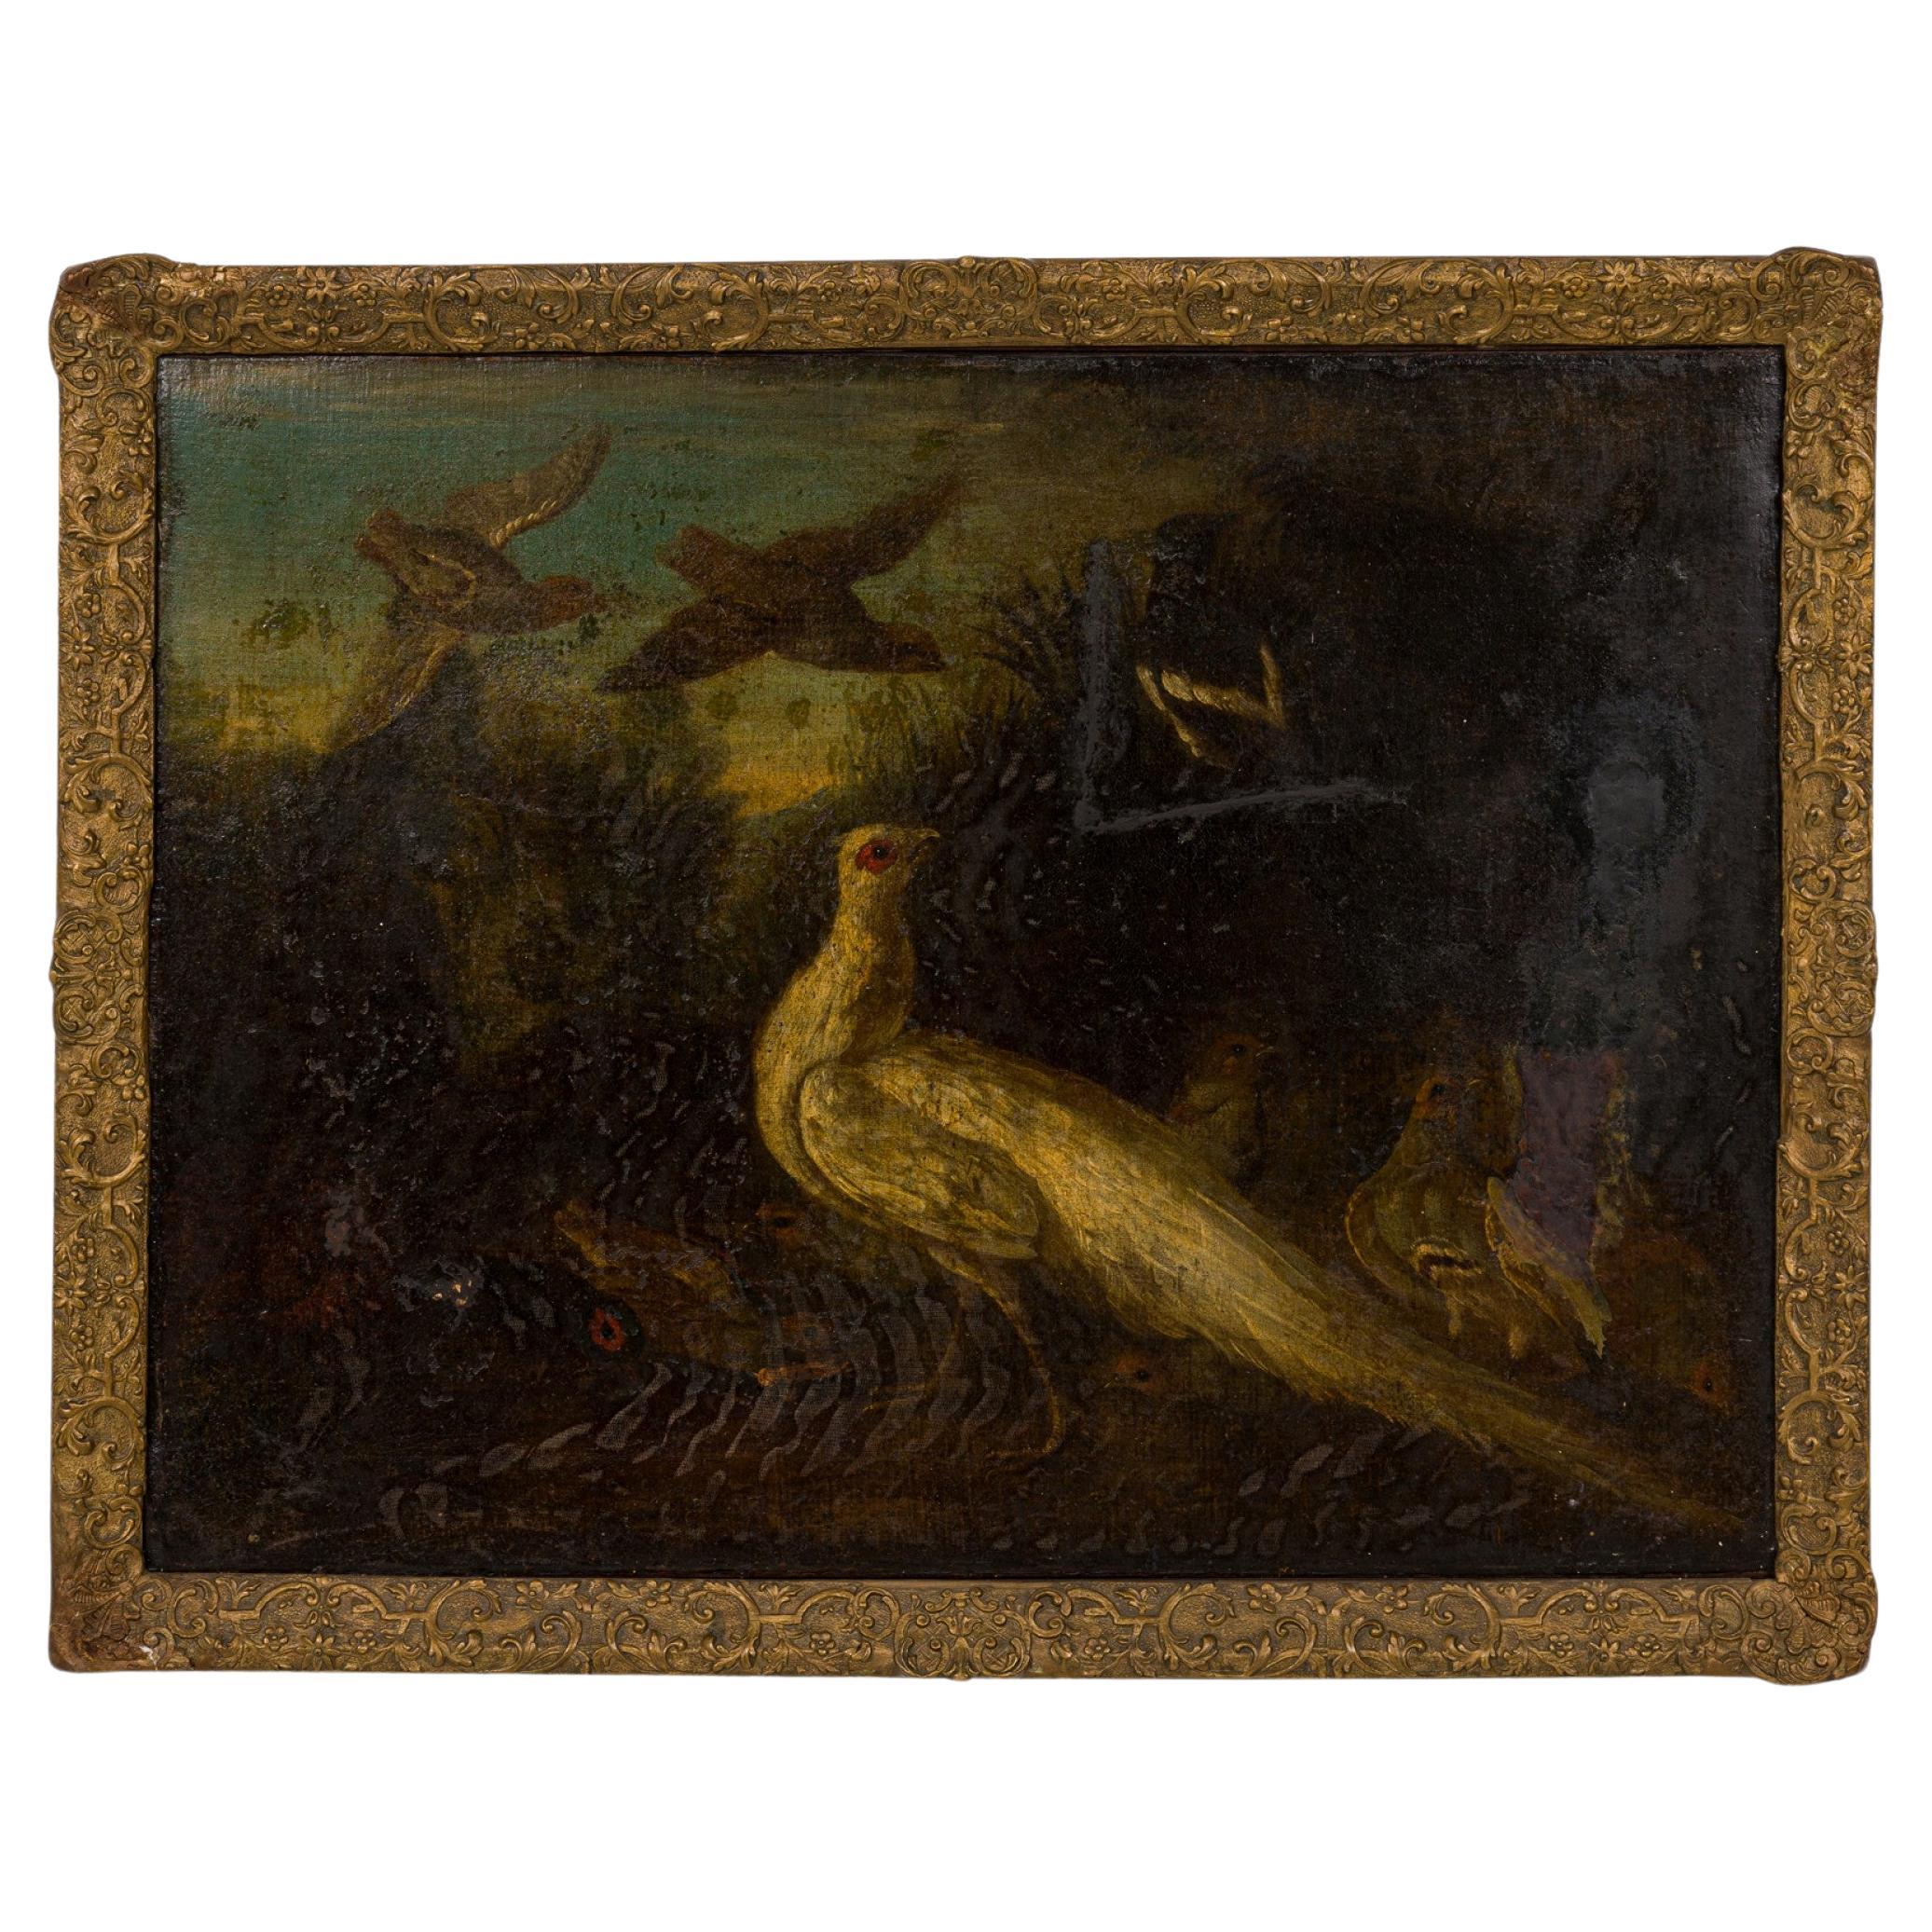 Italian Renaissance-Style Oil Painting of a White Peacock & Other Birds in Frame